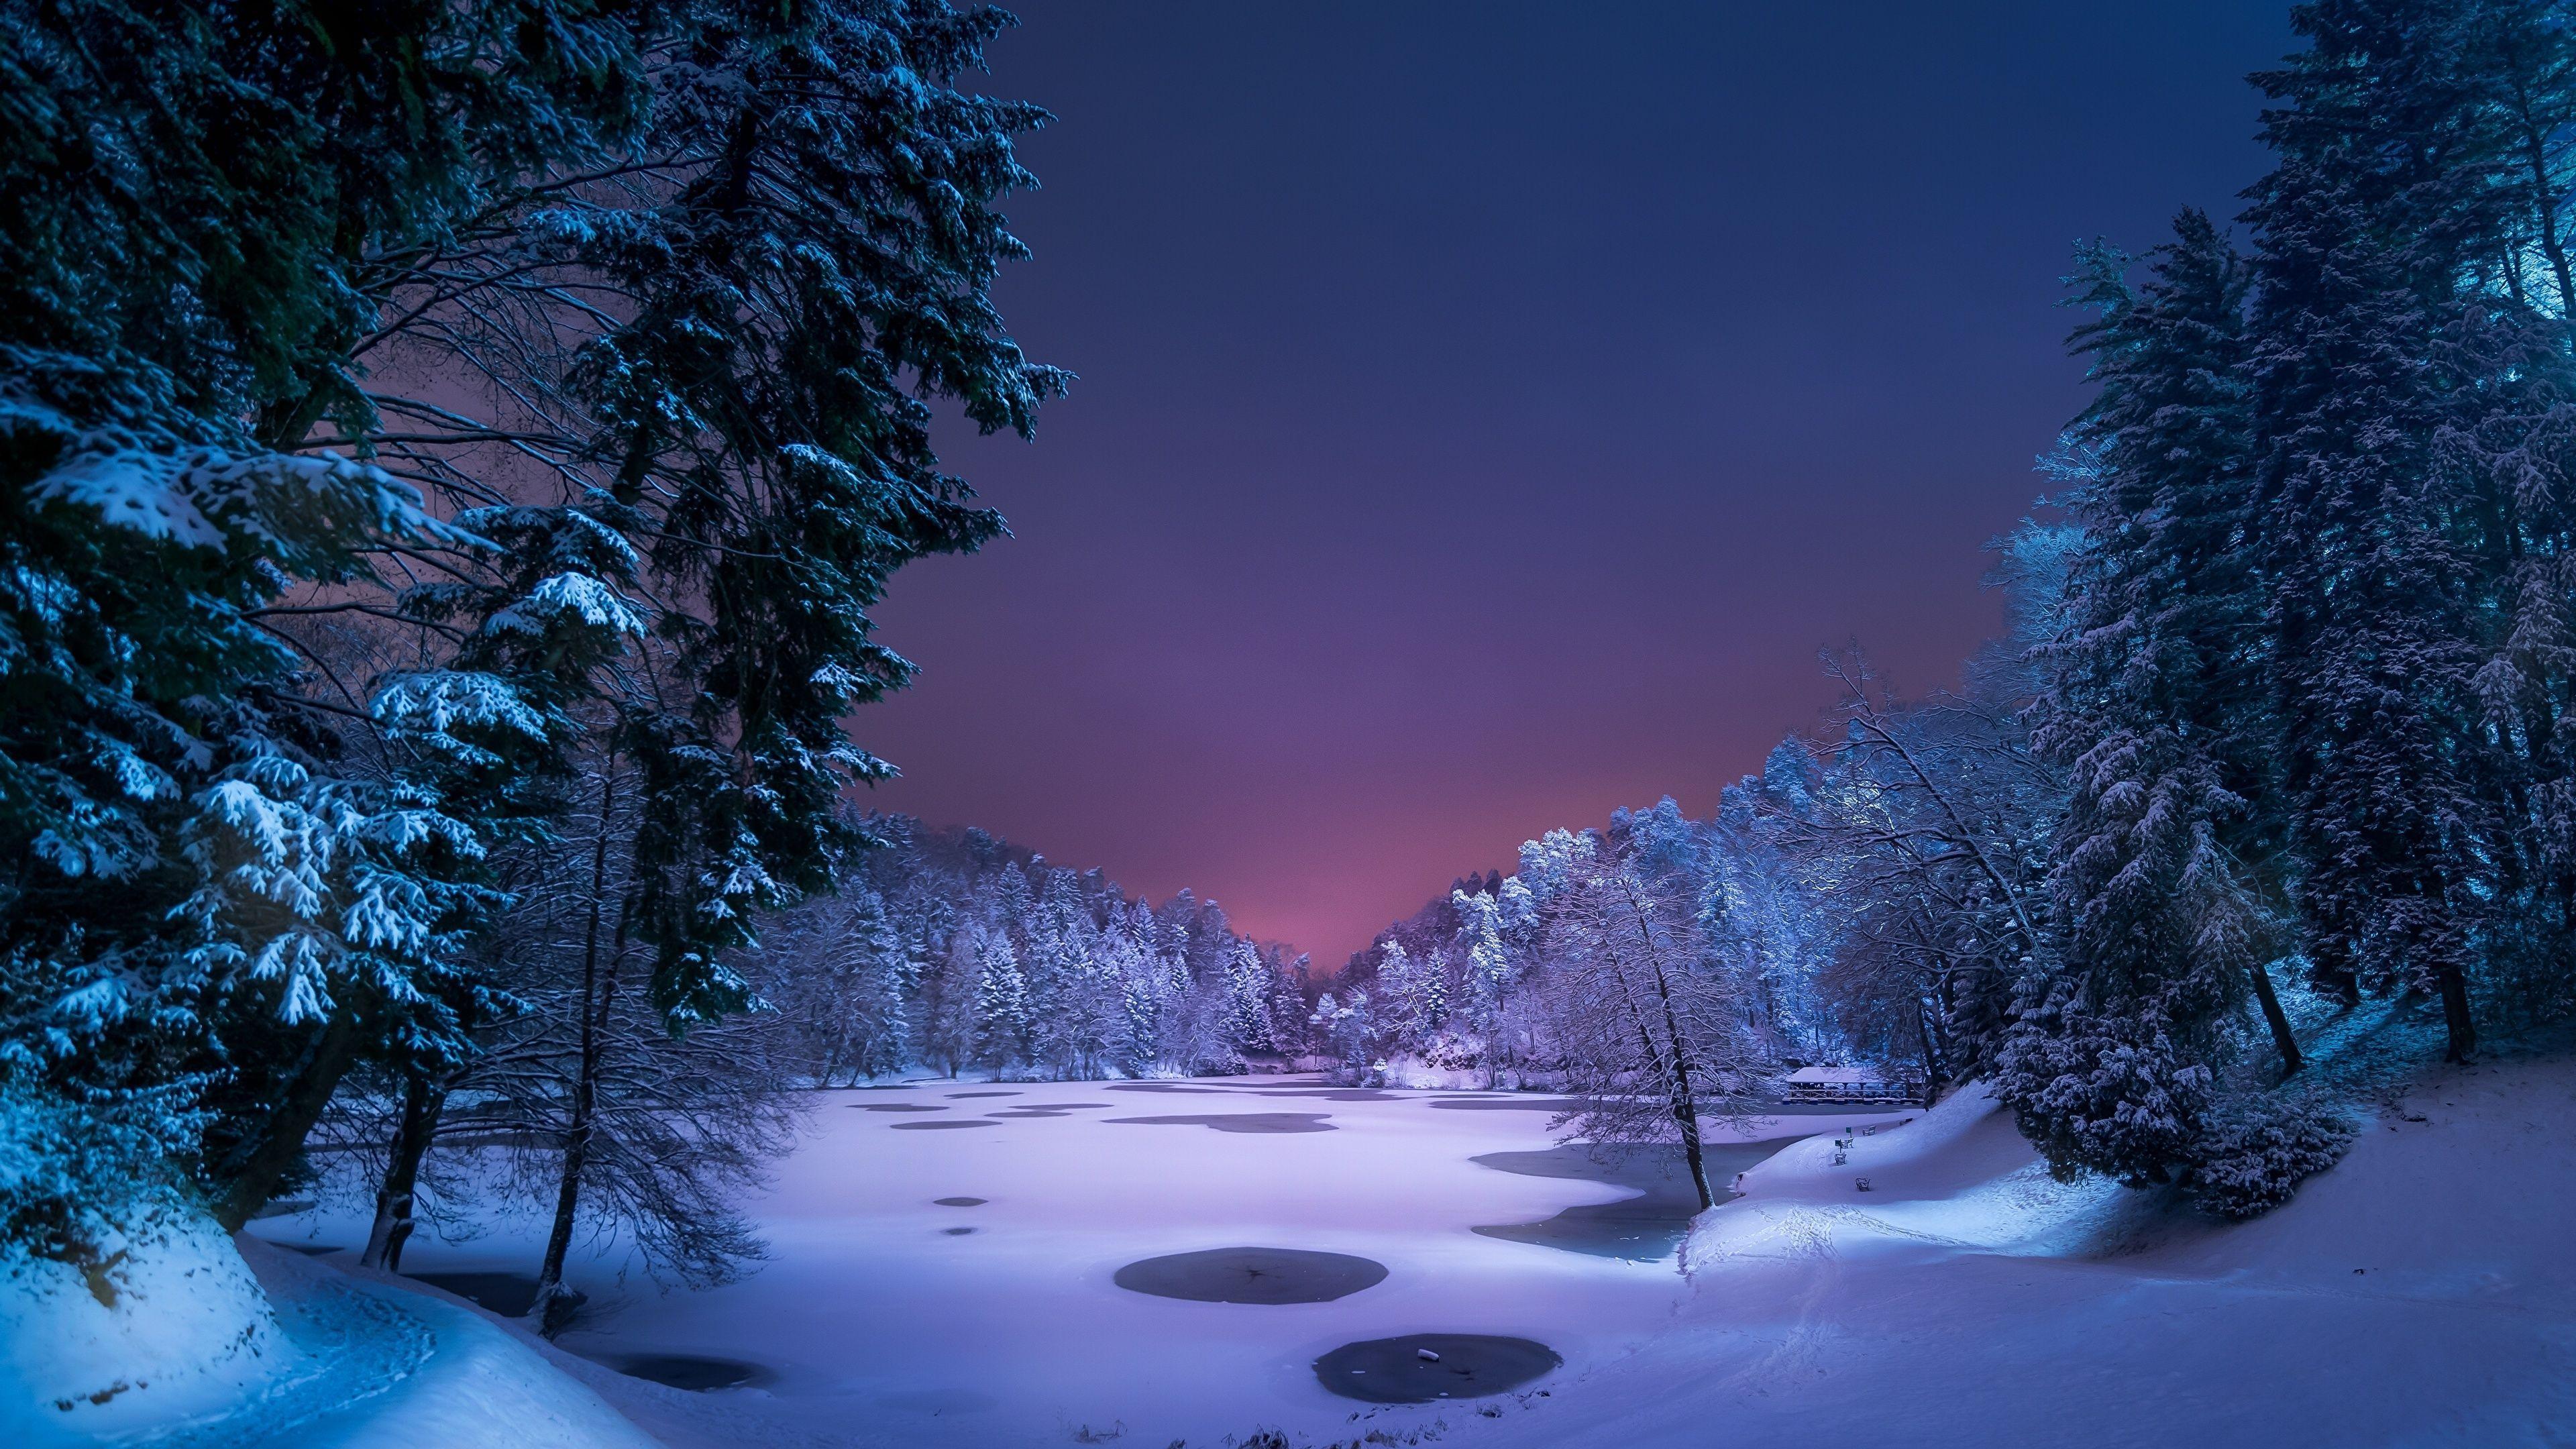 Snowy Forest at Night Wallpapers - Top Free Snowy Forest at Night